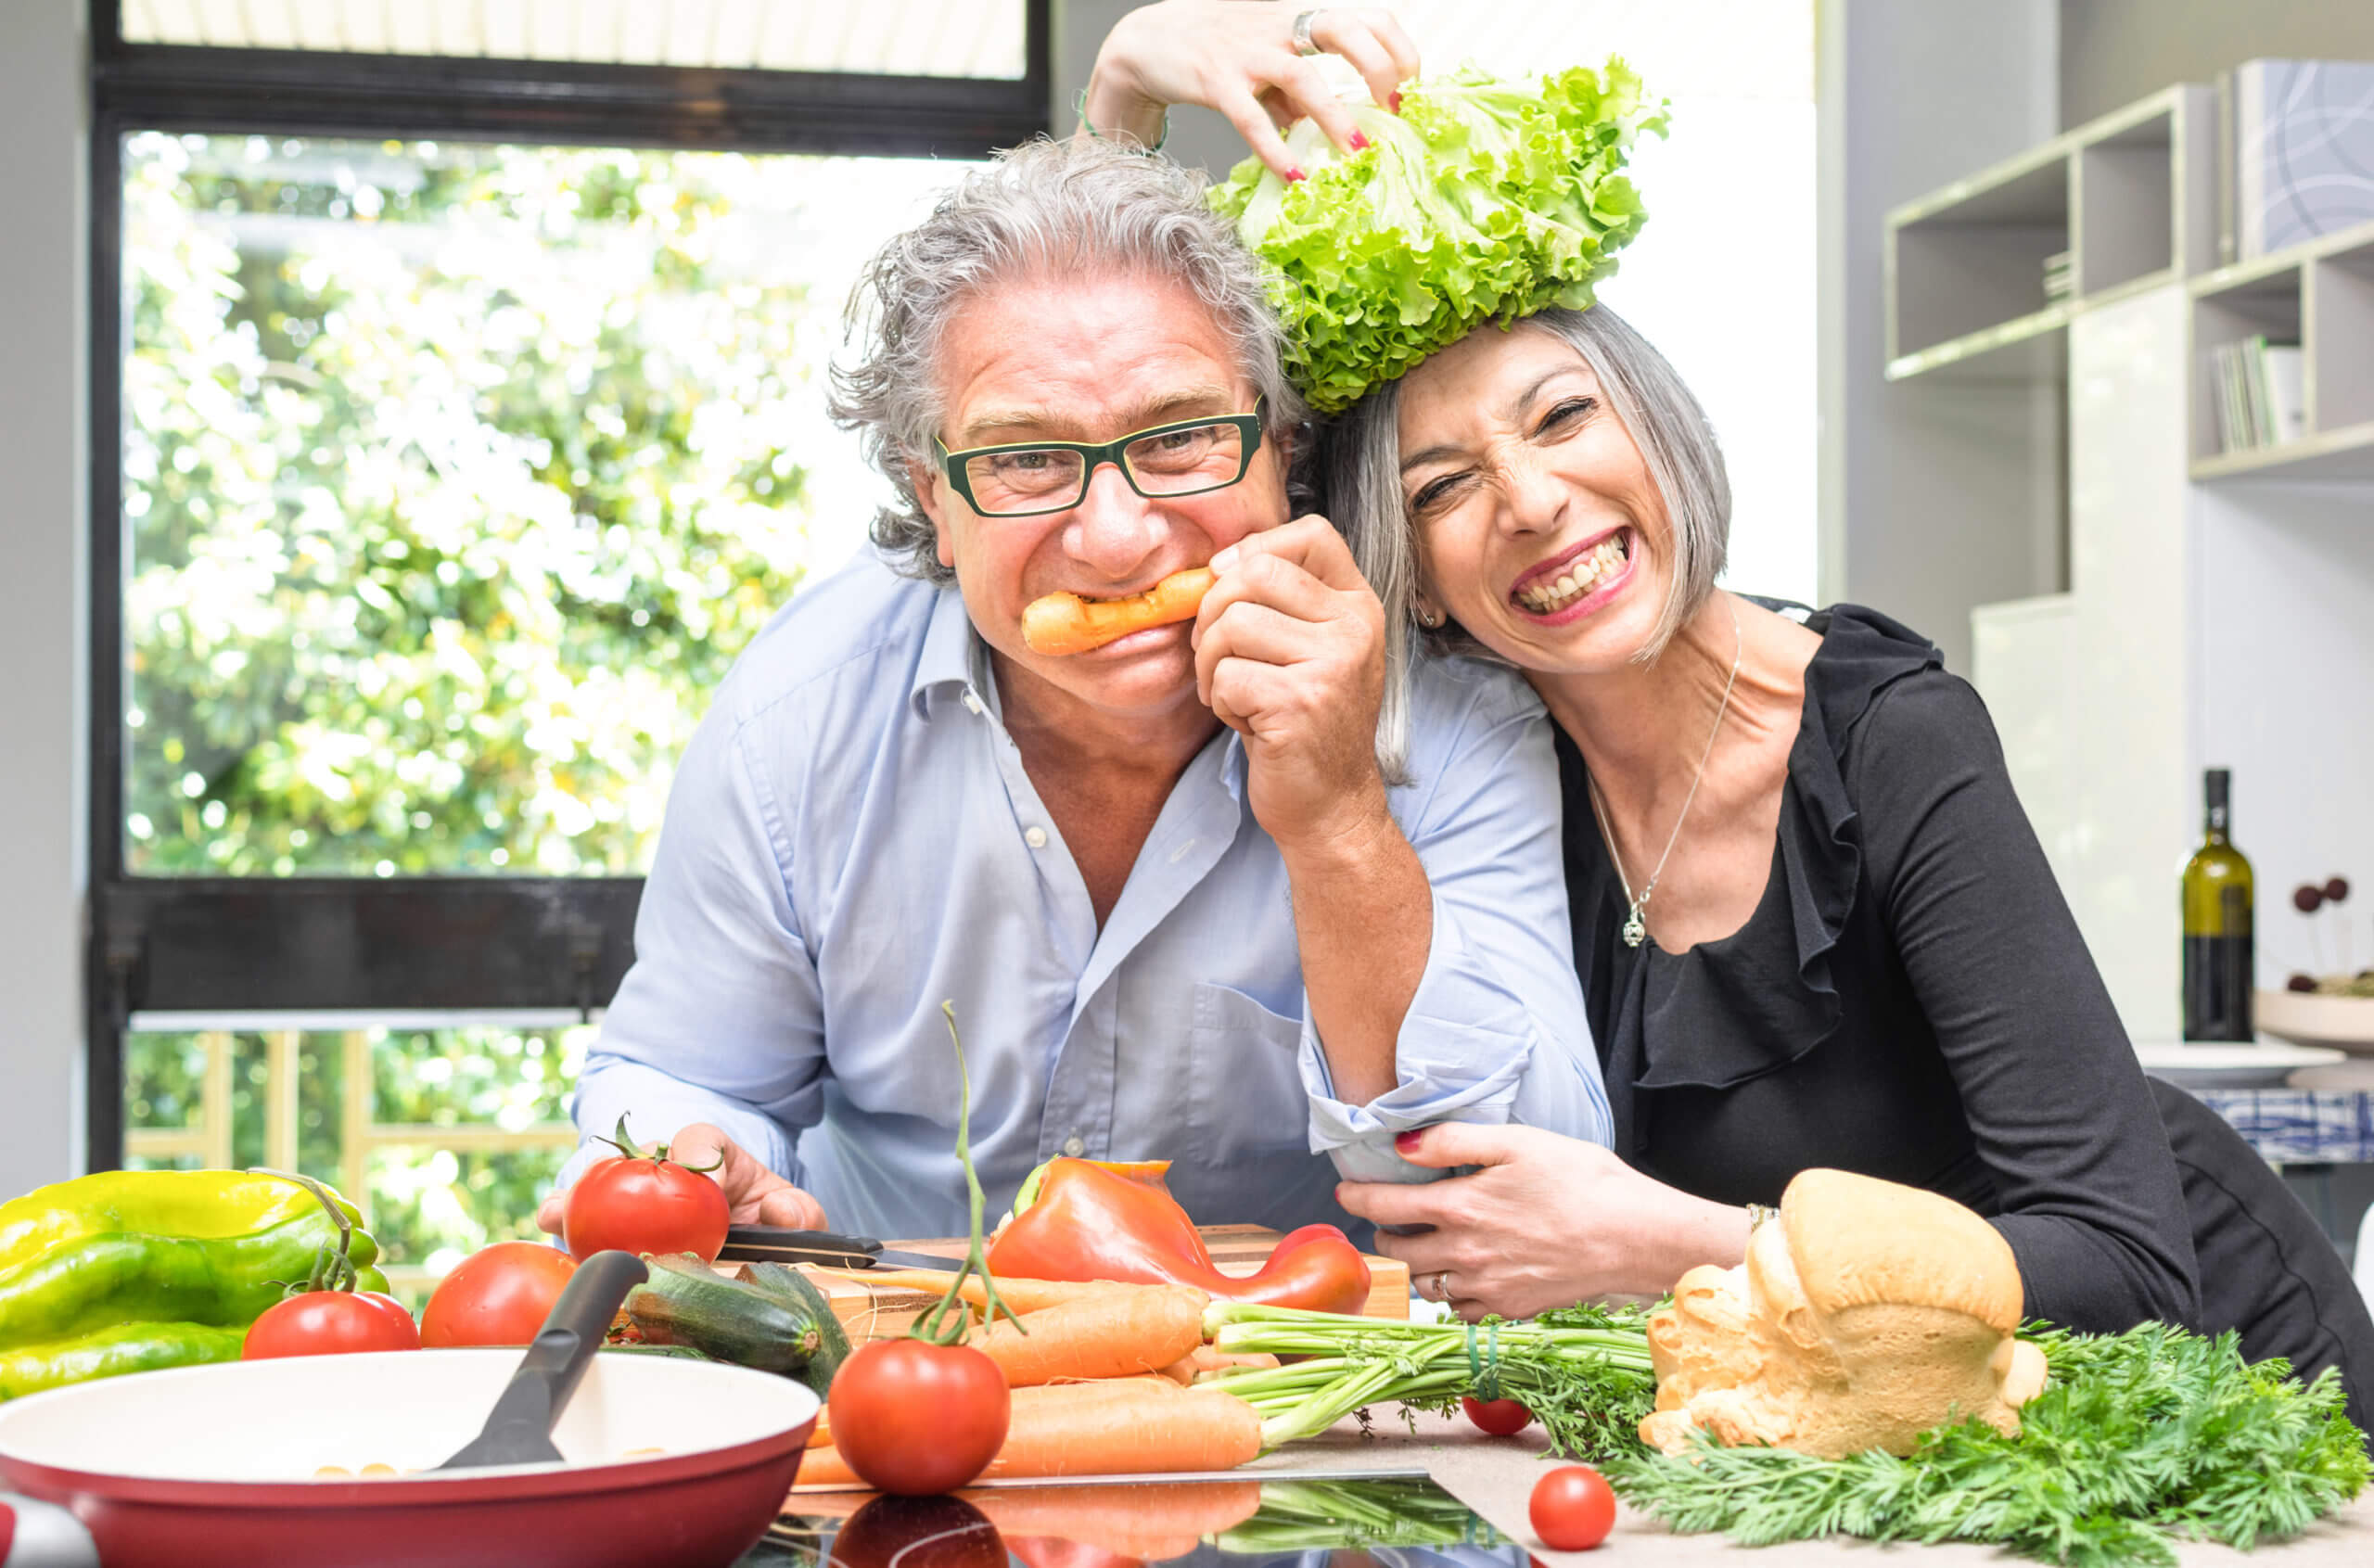 Senior couple having fun in kitchen with healthy food   Retired poeple cooking together vegetarian gourmet plate at home